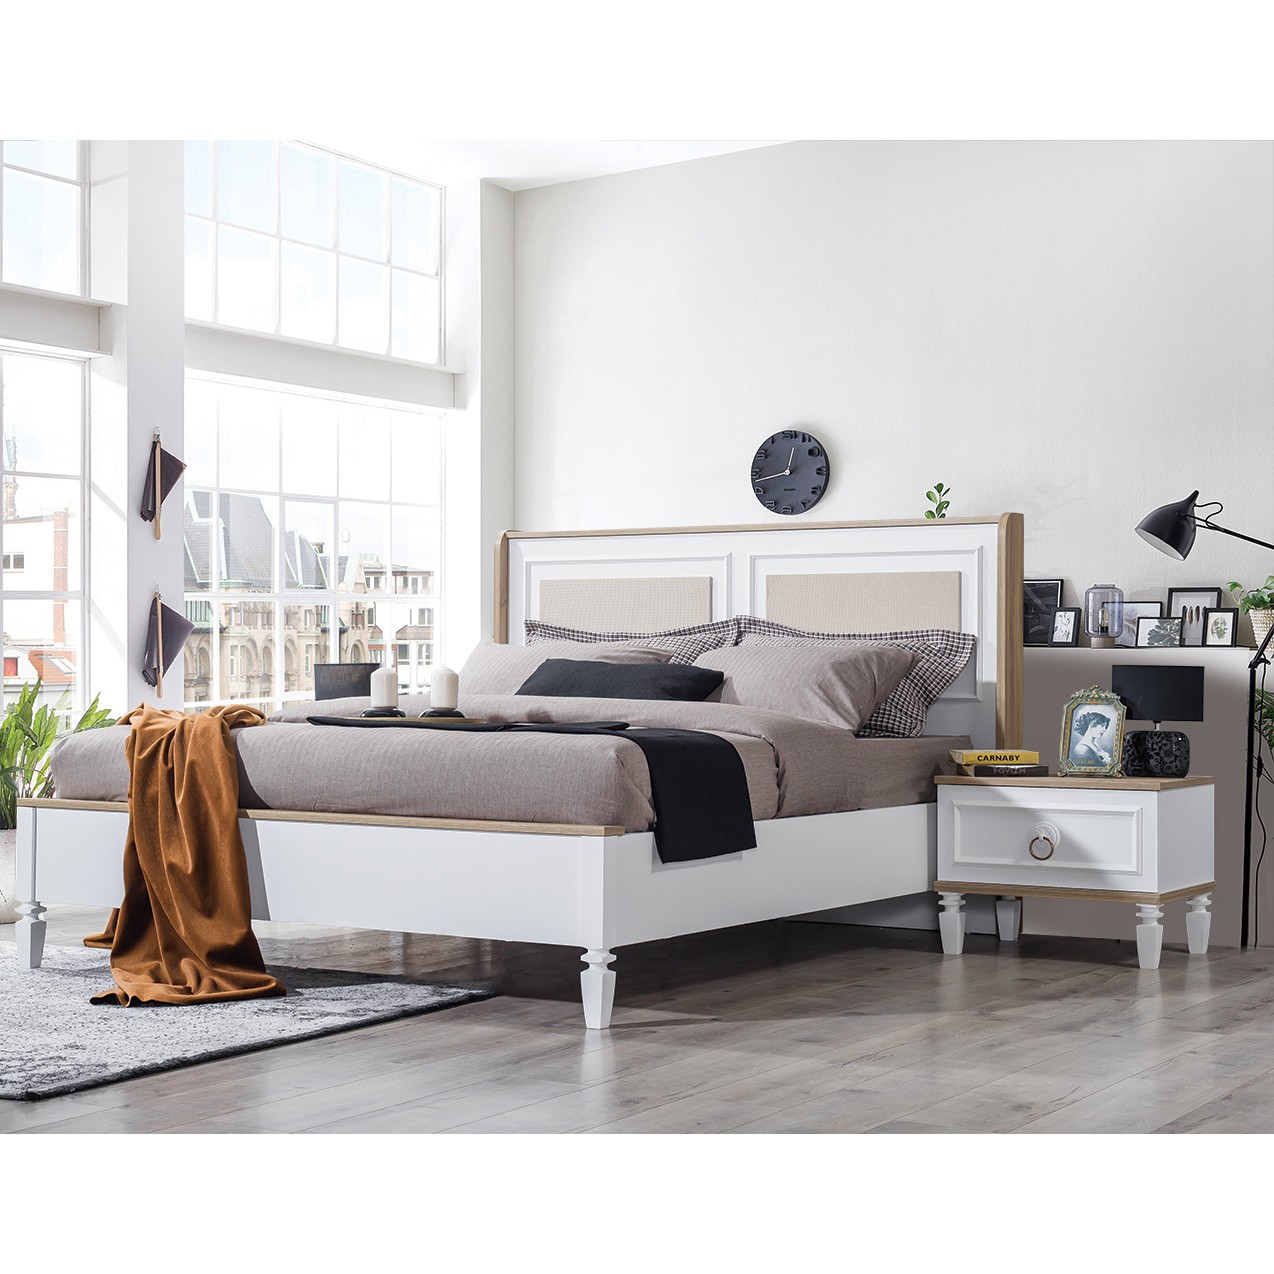 Mila Vol2 Bedroom (Bed Without Storage 160x200cm)